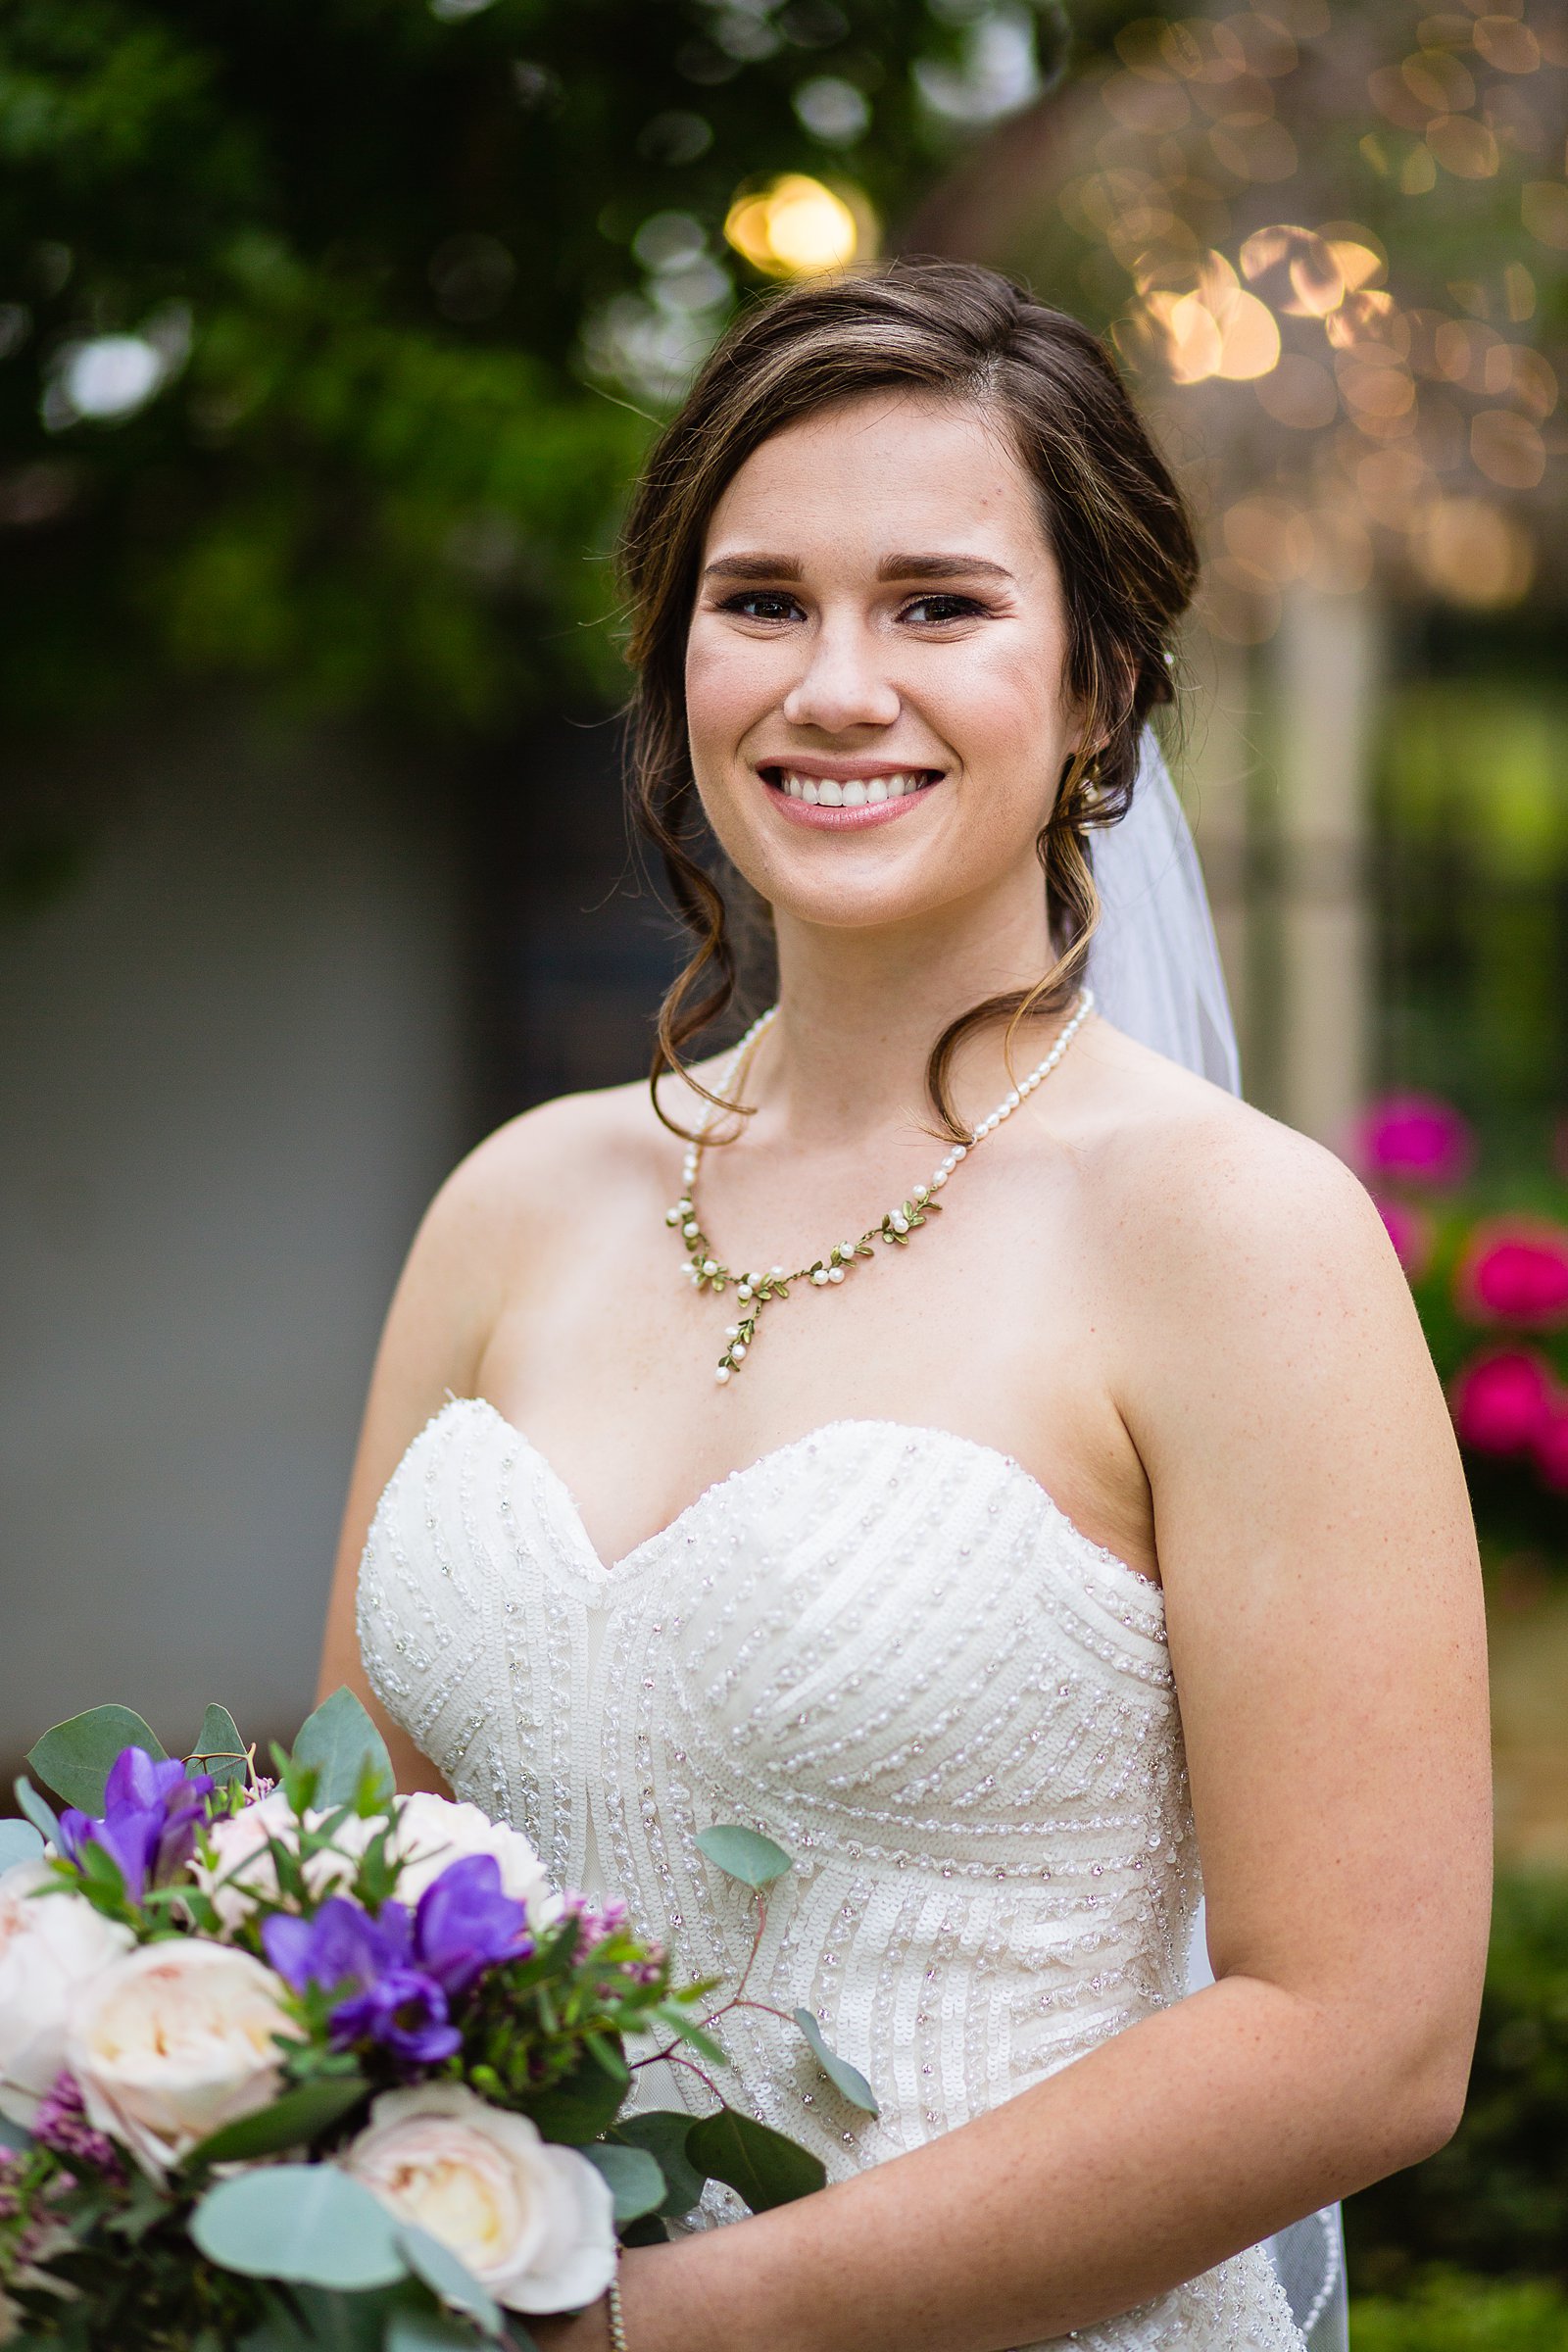 Bride smiling on her wedding day.